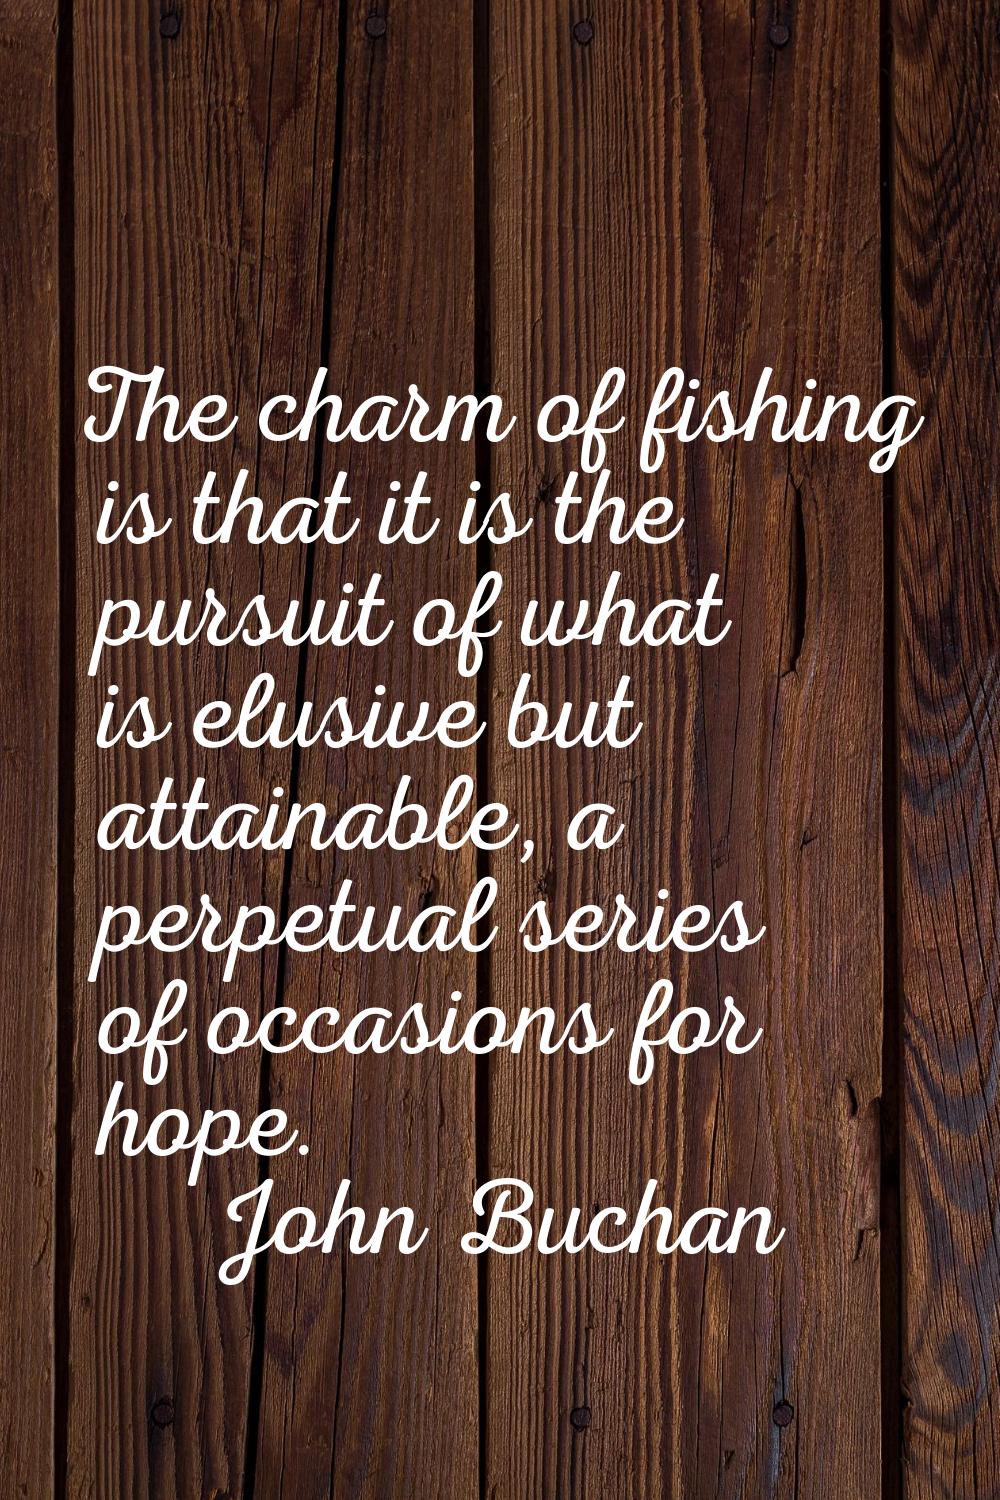 The charm of fishing is that it is the pursuit of what is elusive but attainable, a perpetual serie